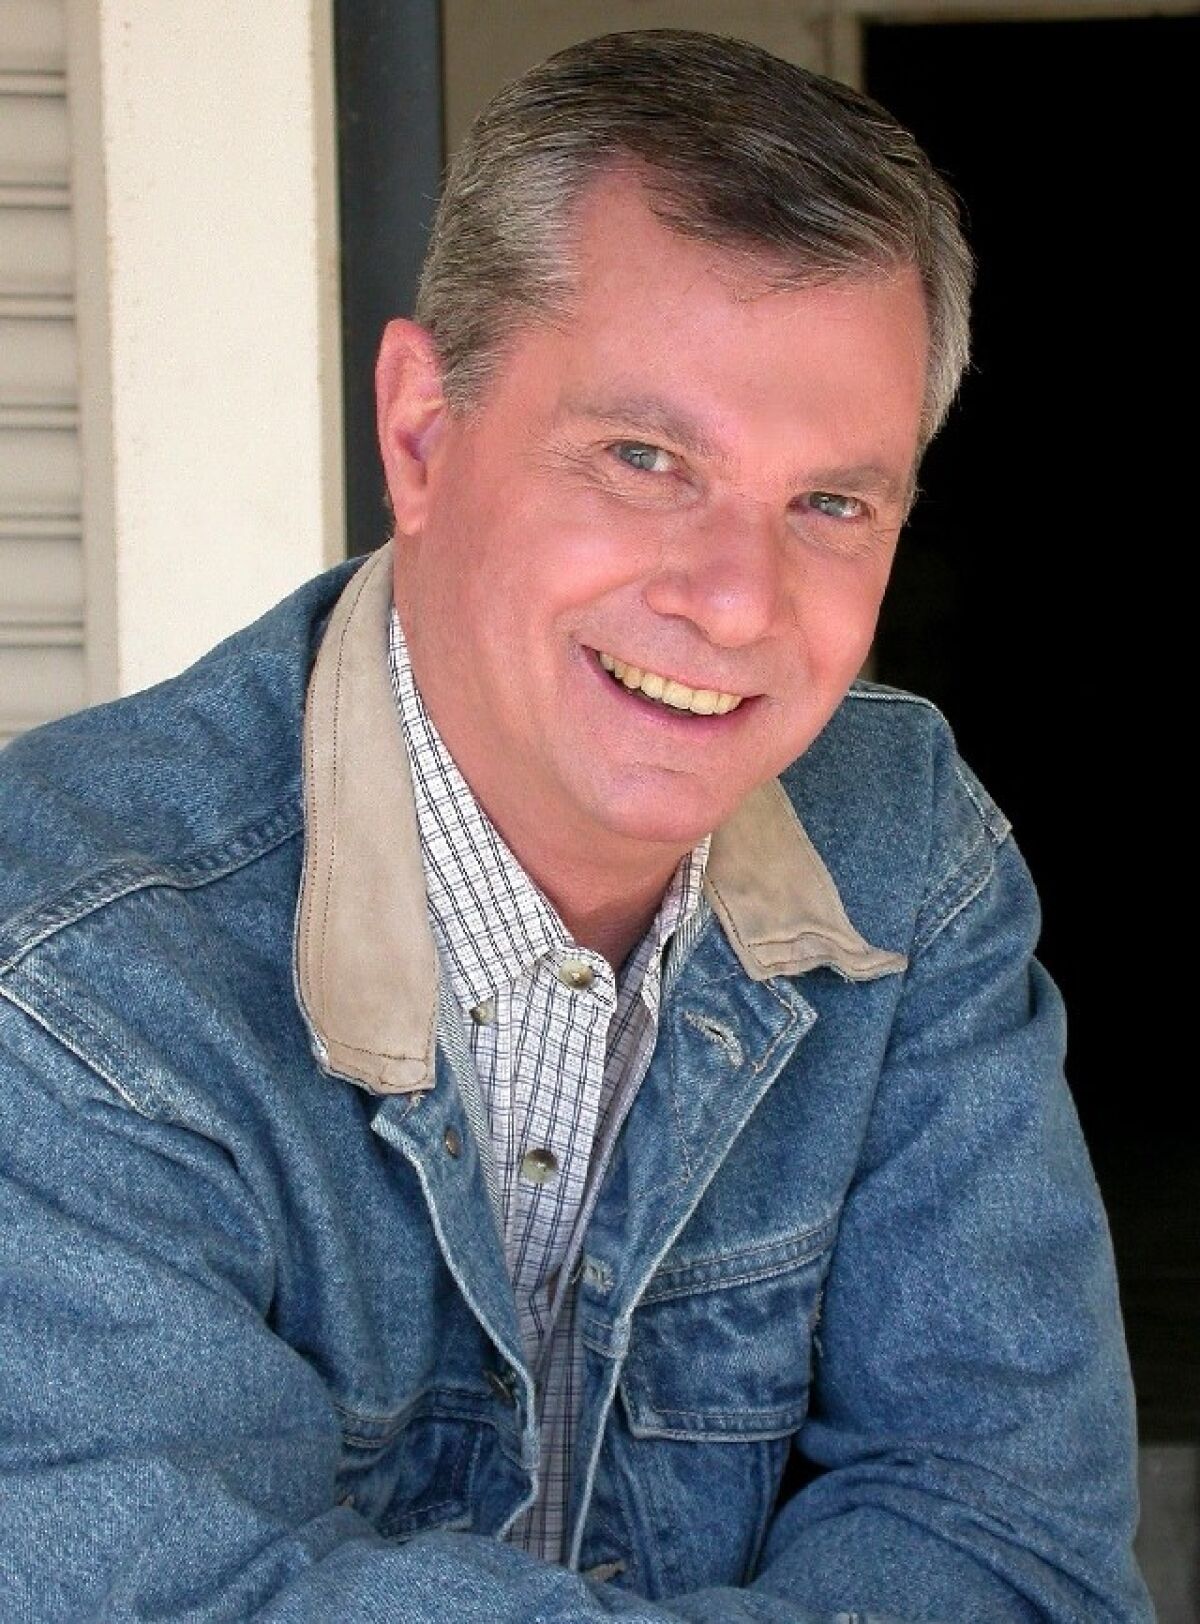 A smiling man in a jean jacket and checkered shirt.